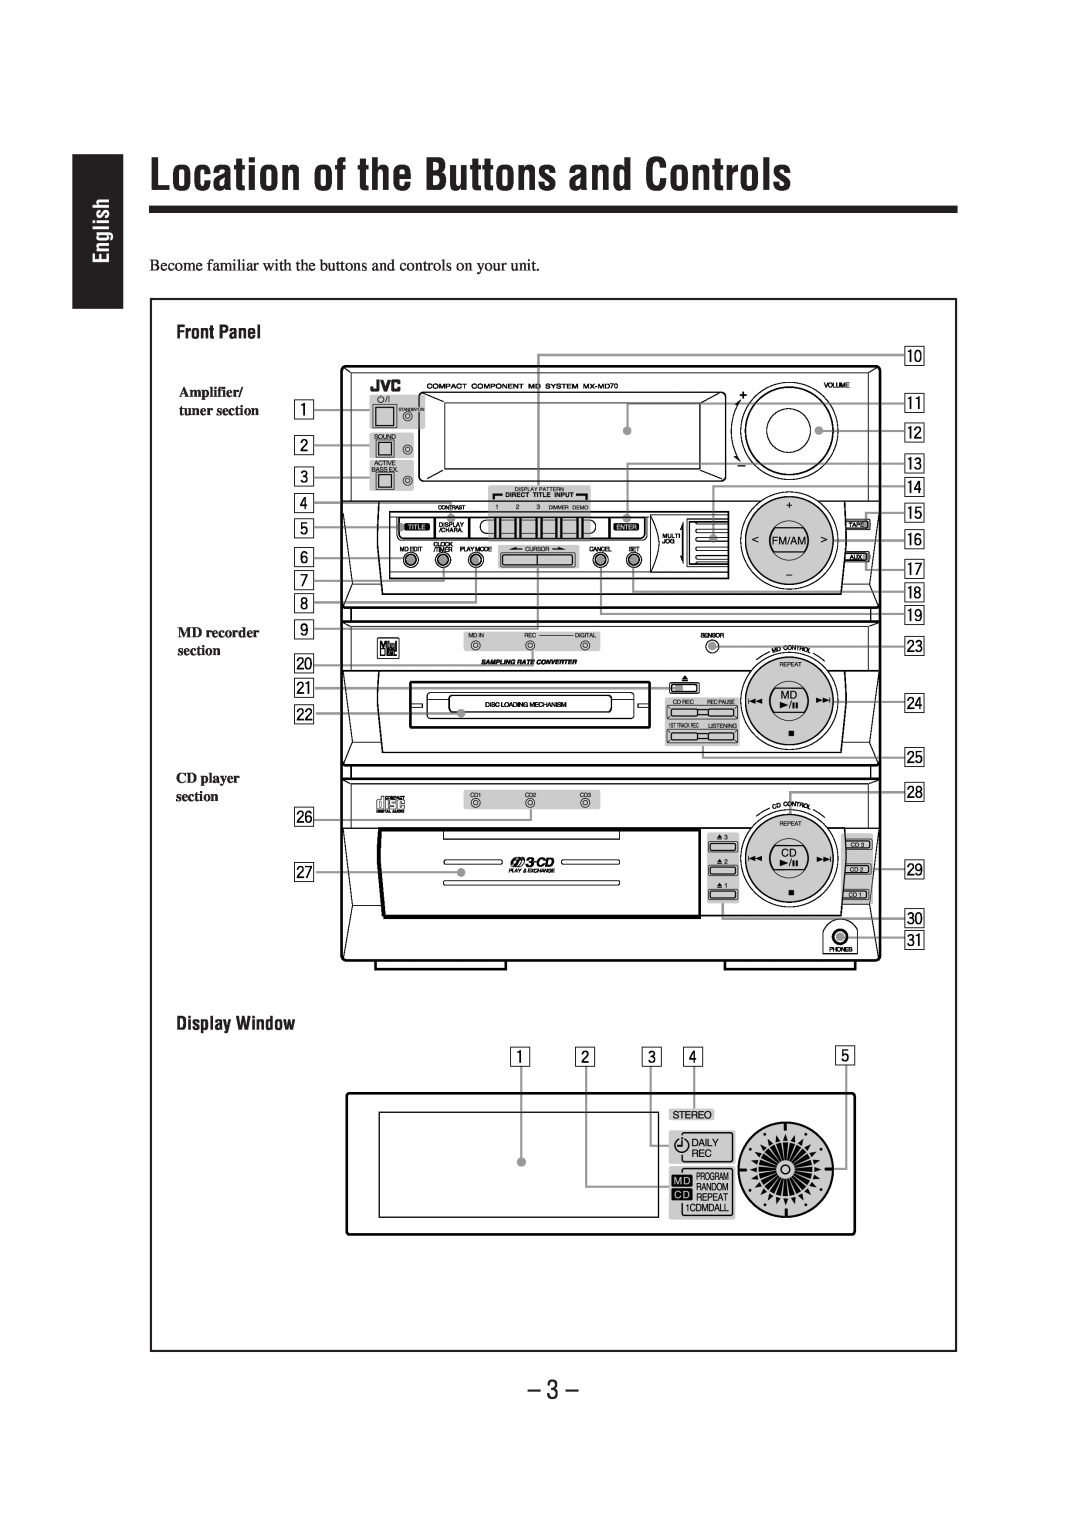 JVC CA-MD70 manual Location of the Buttons and Controls, English 